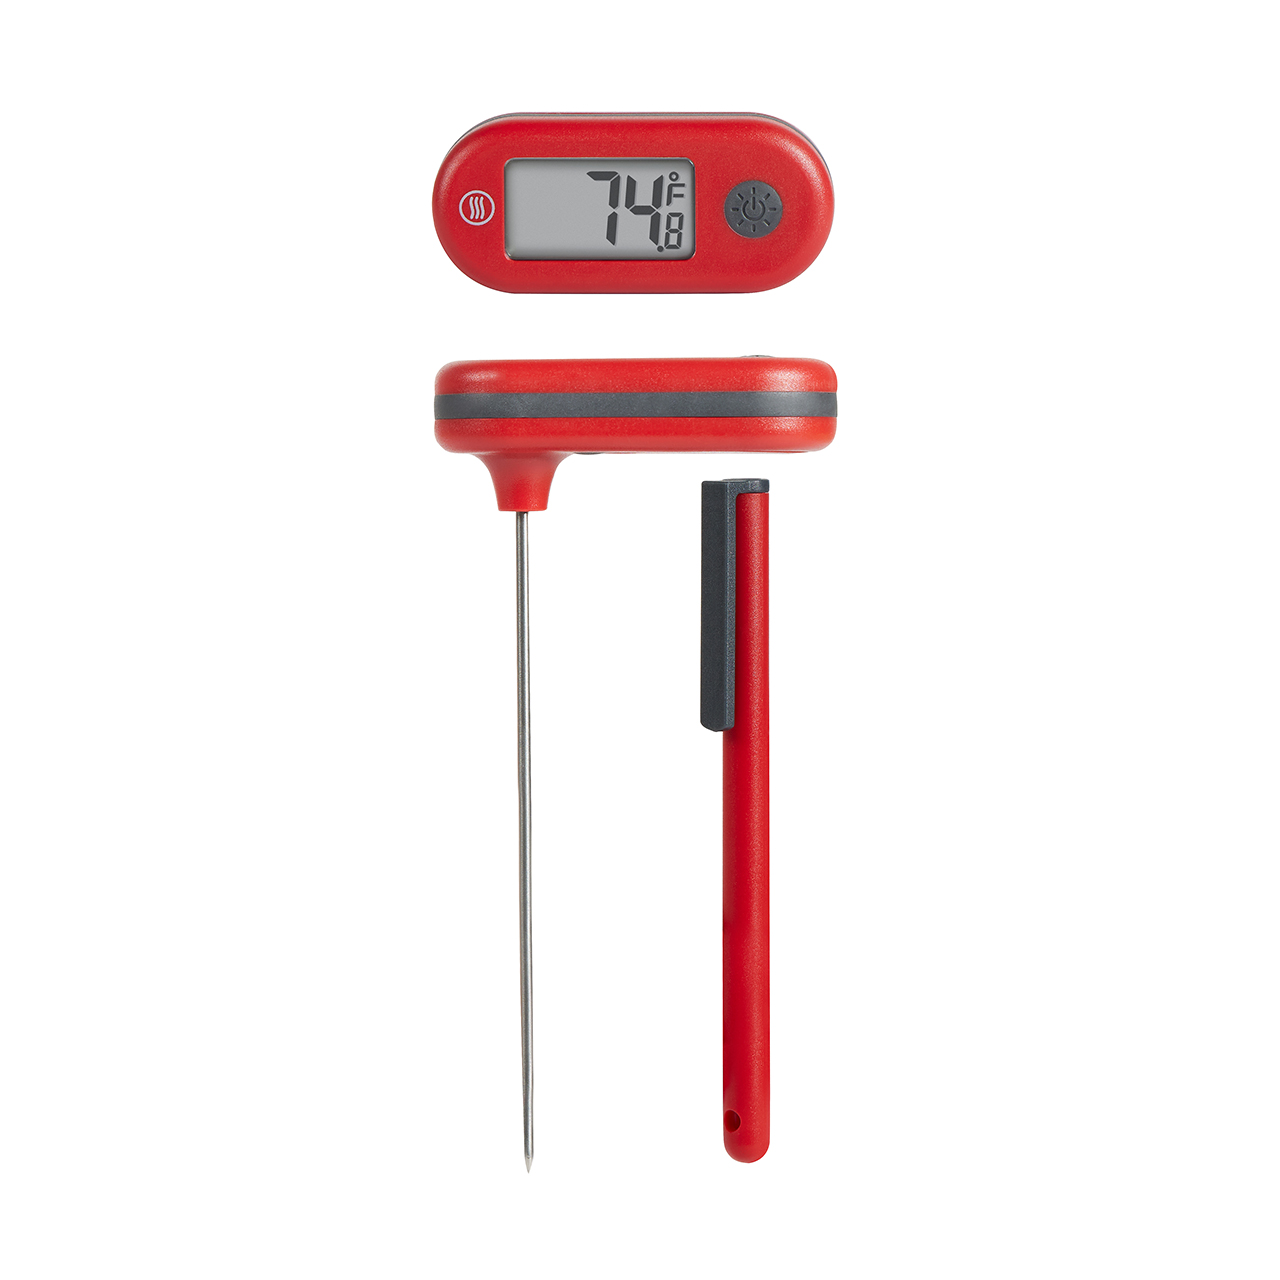 ThermoWorks TX-3100-PK Thermometer,-58 to 572 deg F,-50 t